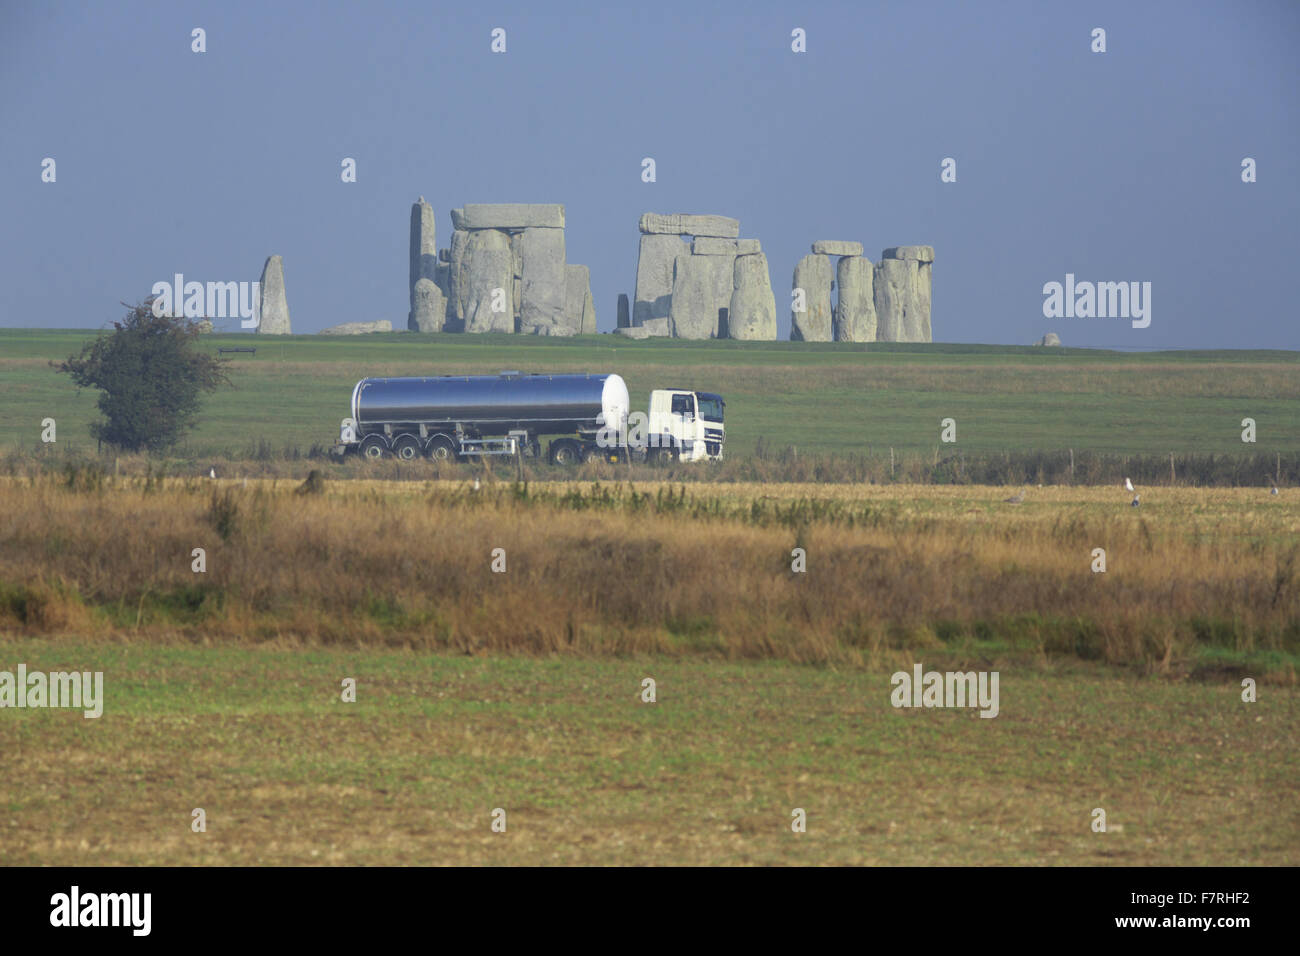 A lorry on the A303 near the Stonehenge Landscape, Wiltshire. The landscape is studded with ancient monuments. Stock Photo